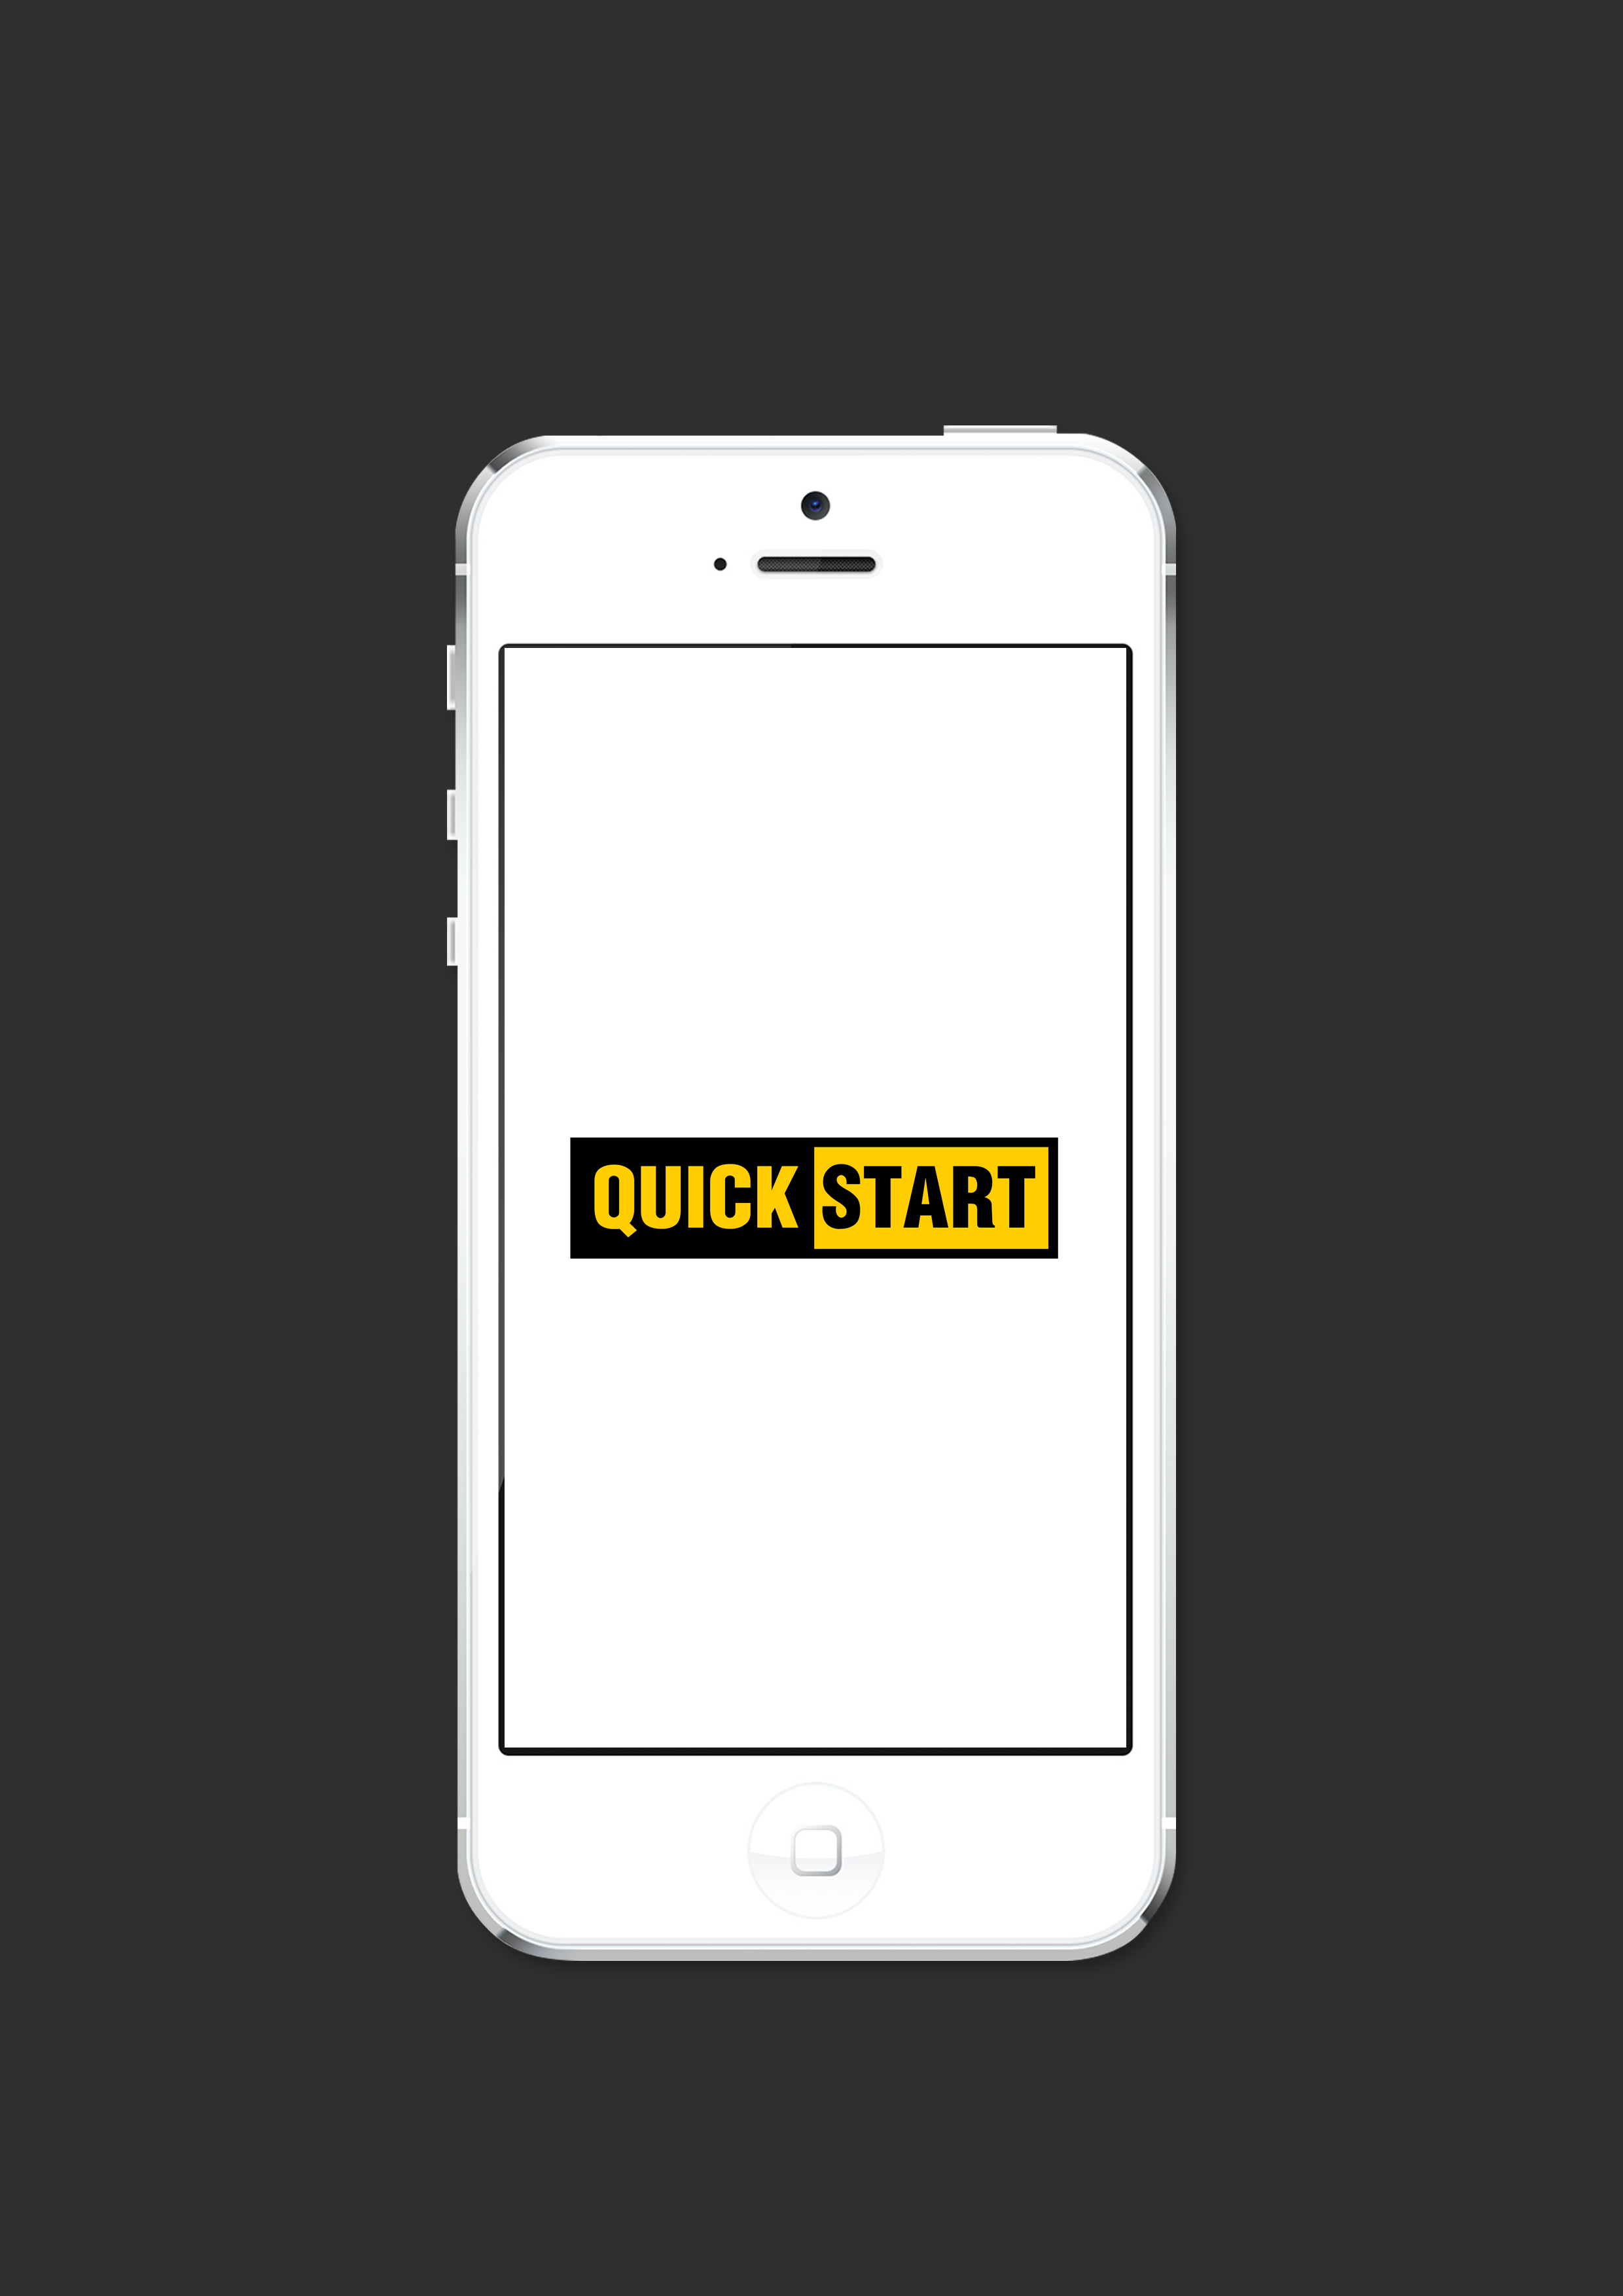 The Quick Start Device is an automotive invention created to provide an effective and secured way of starting a vehicle’s ignition without the use of a regular key.